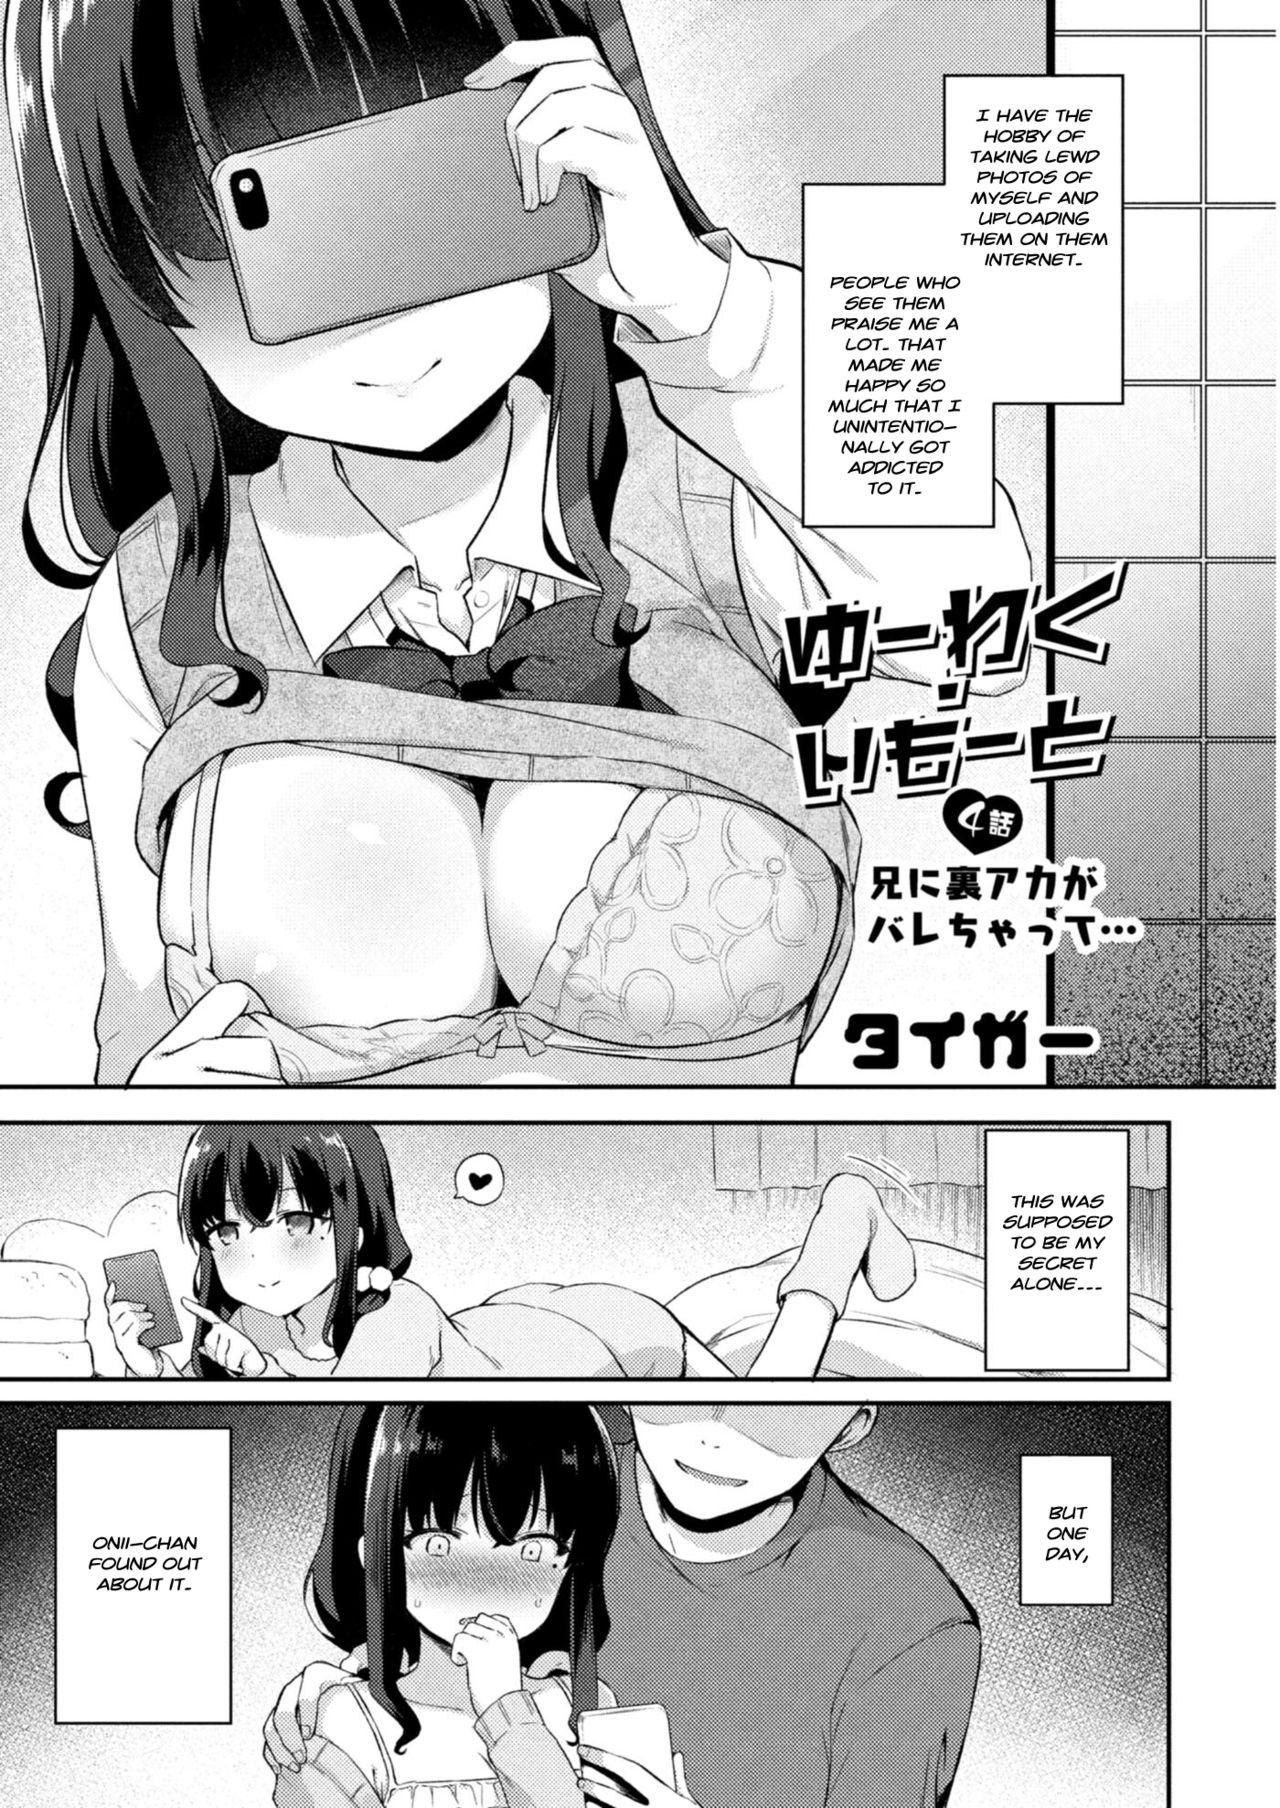 Shecock Yuuwaku・Imouto #4 Ani ni Uraaka ga Barechatt... | Little Sister Temptation #4 My Older Brother Found Out About my Secret Acc... Shaved Pussy - Page 1